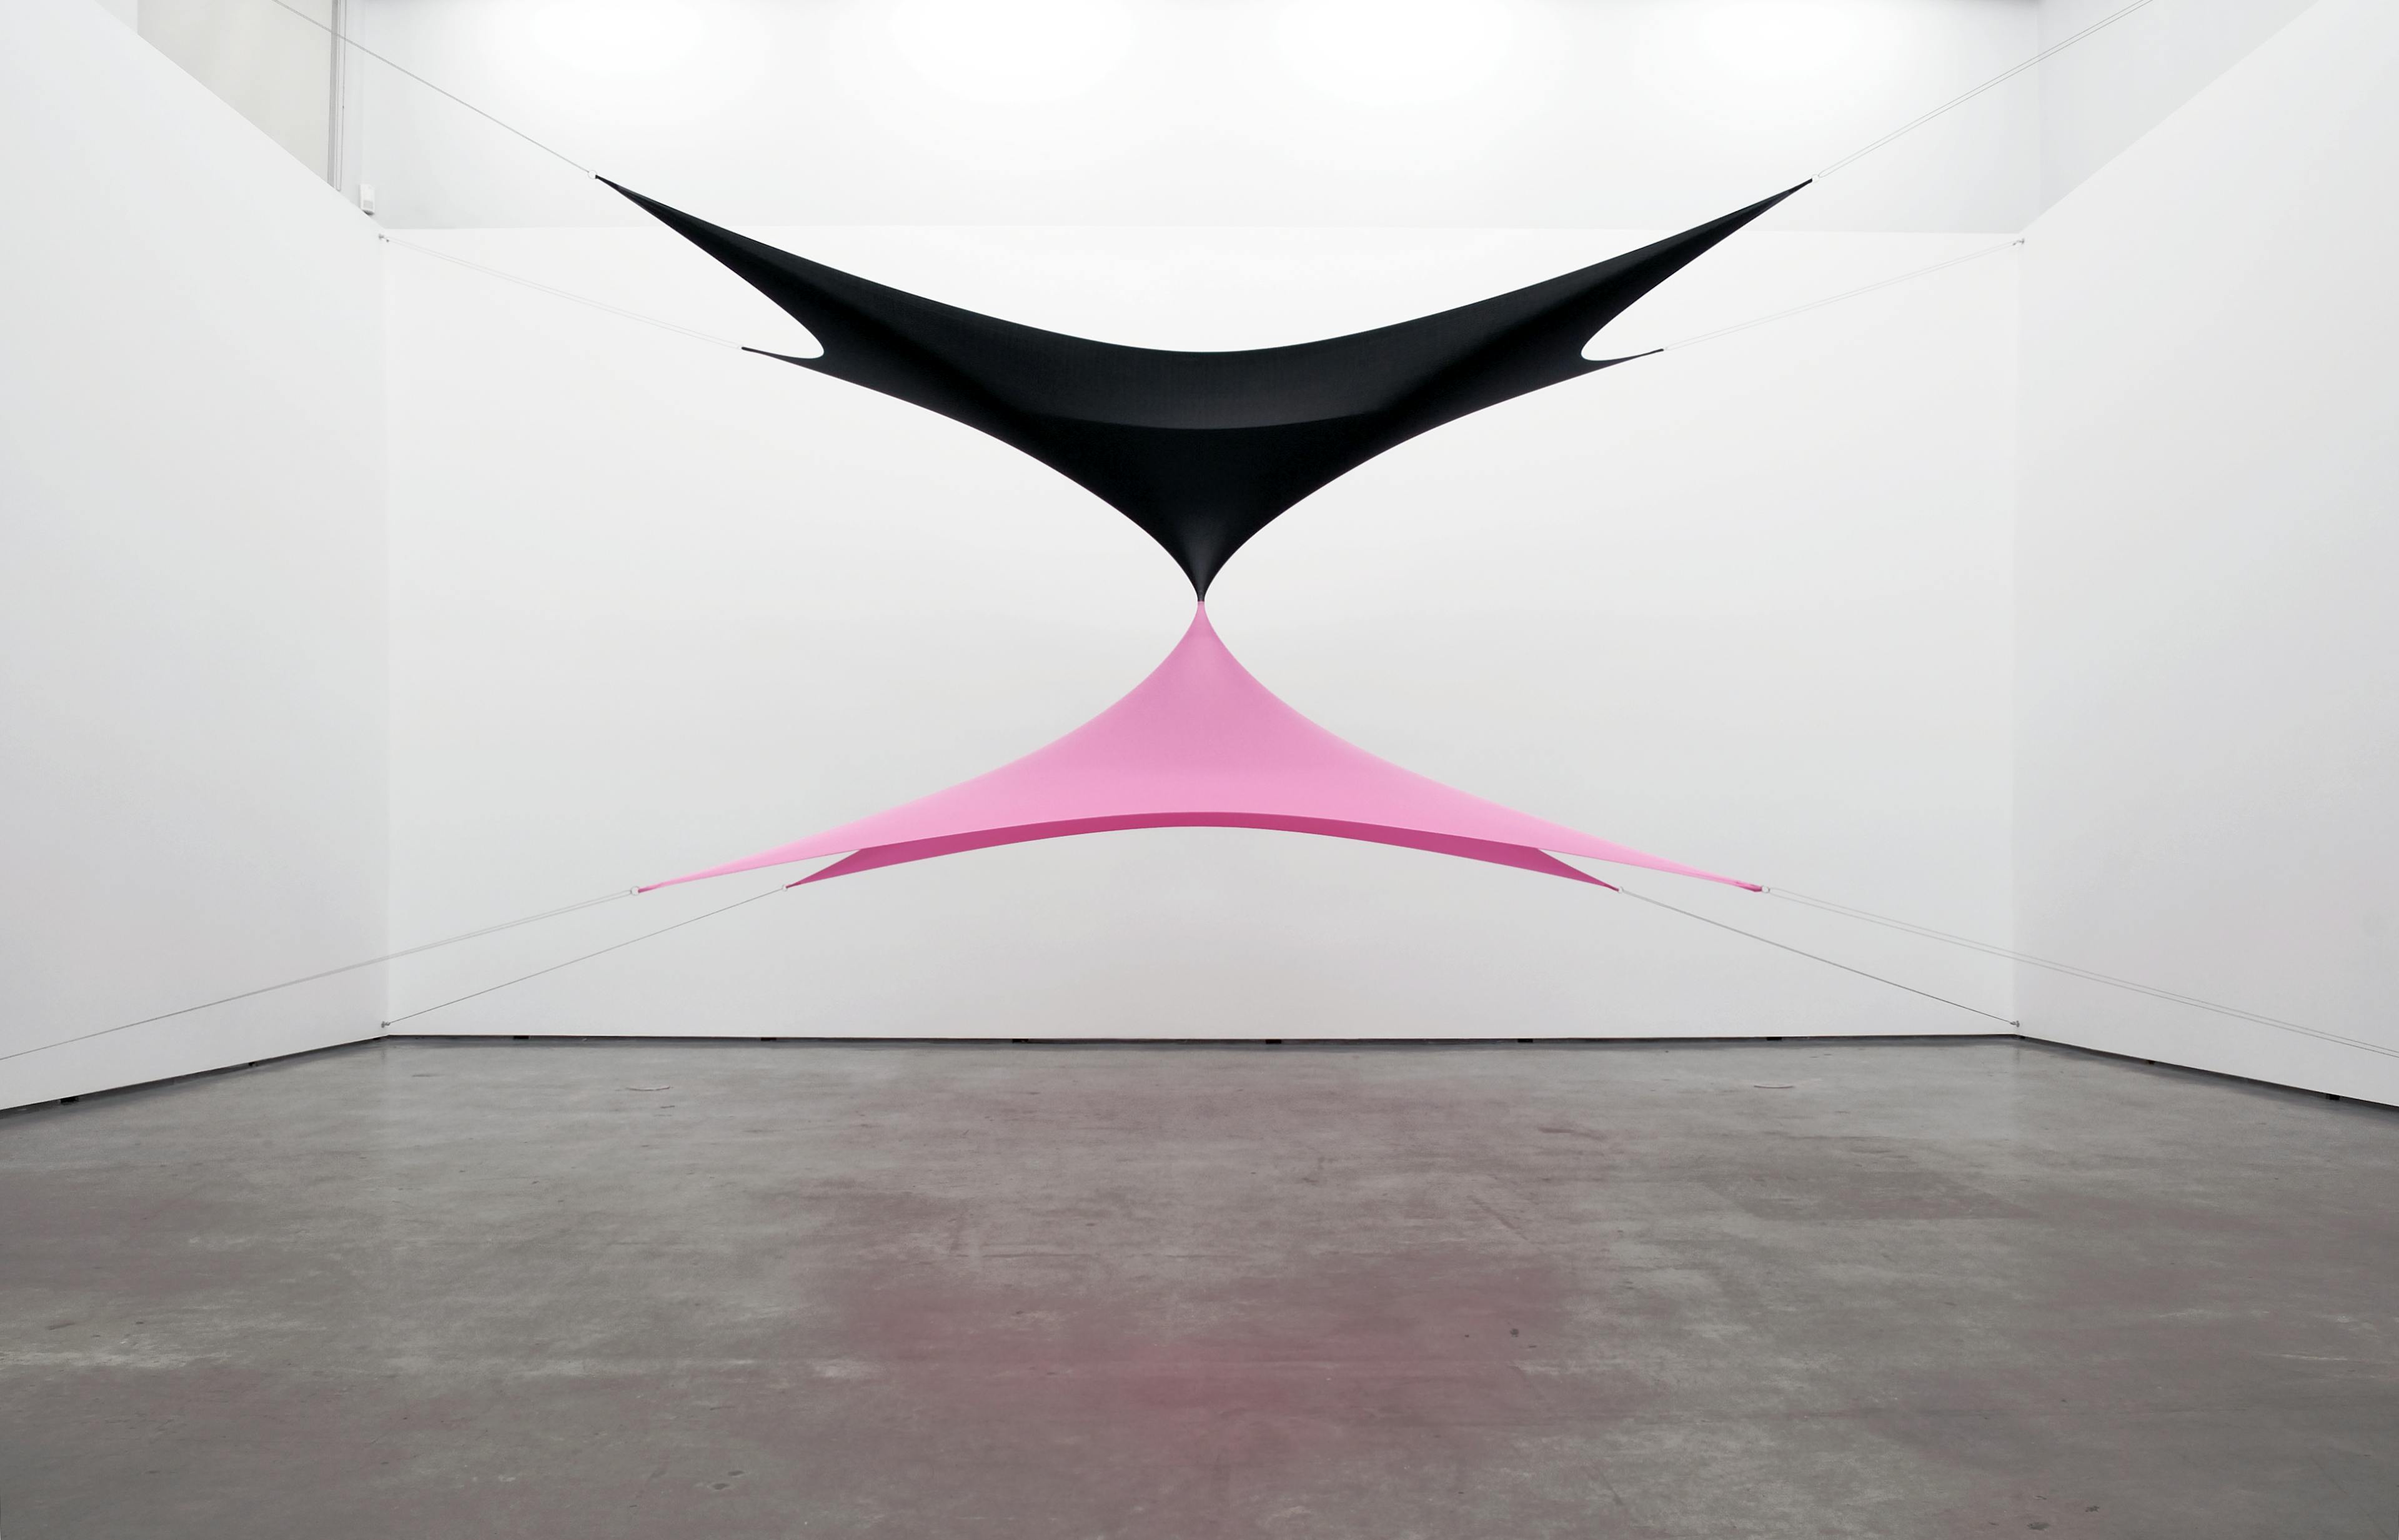 Black and pink fabric are installed in a gallery space. They both are stretched to make tent-like shape. Black fabric is suspended from four corners of ceilings, and pink fabric is suspended from four corners of the floor.